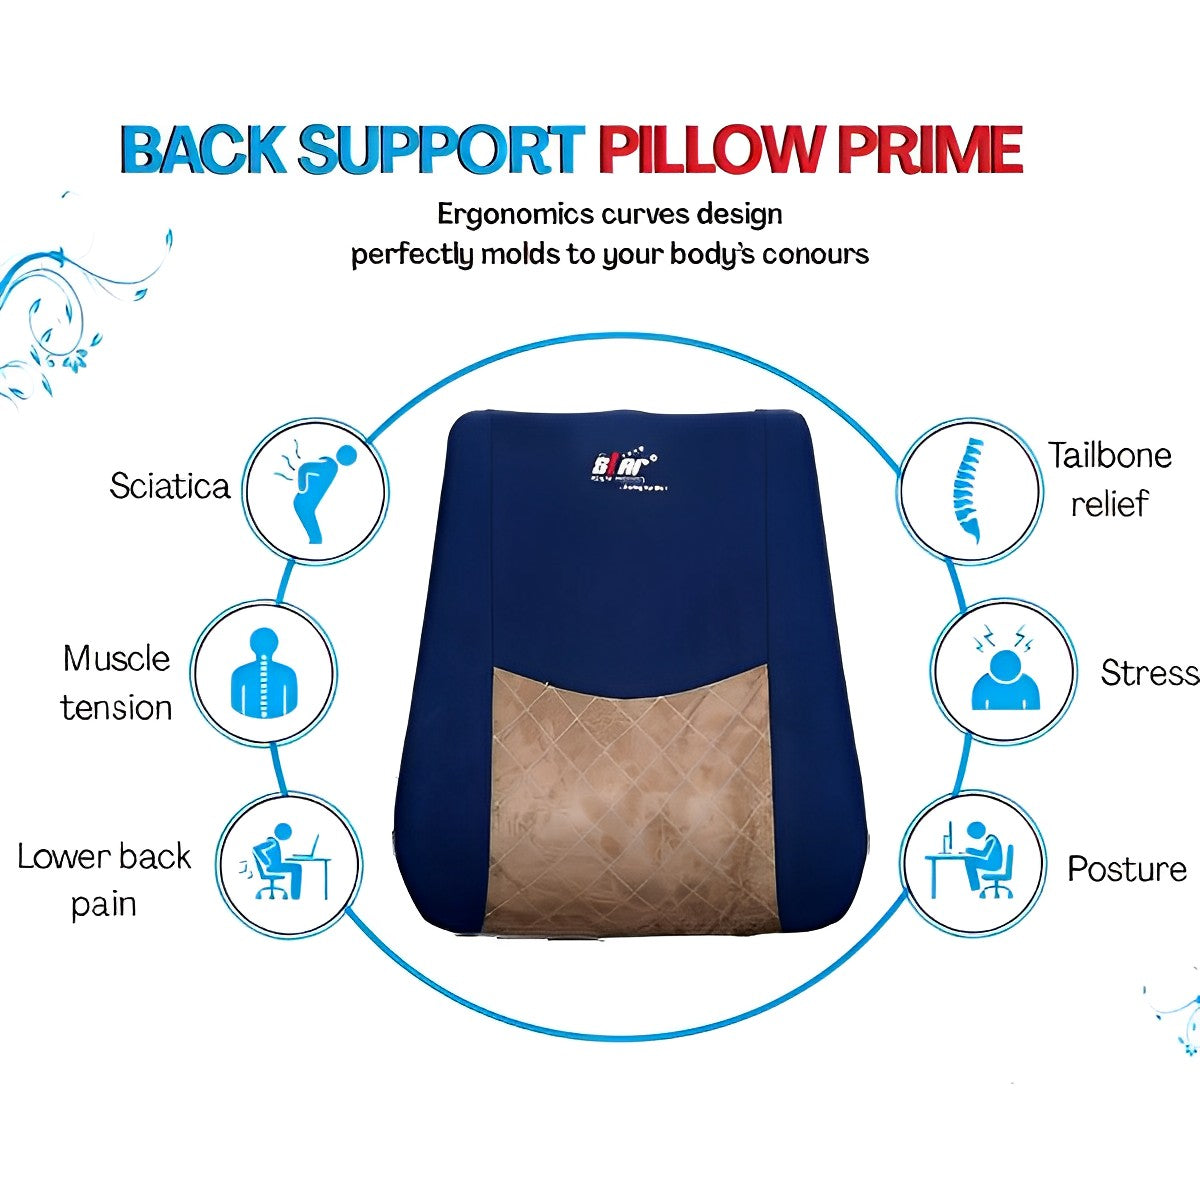 Back Support Pillow Prime